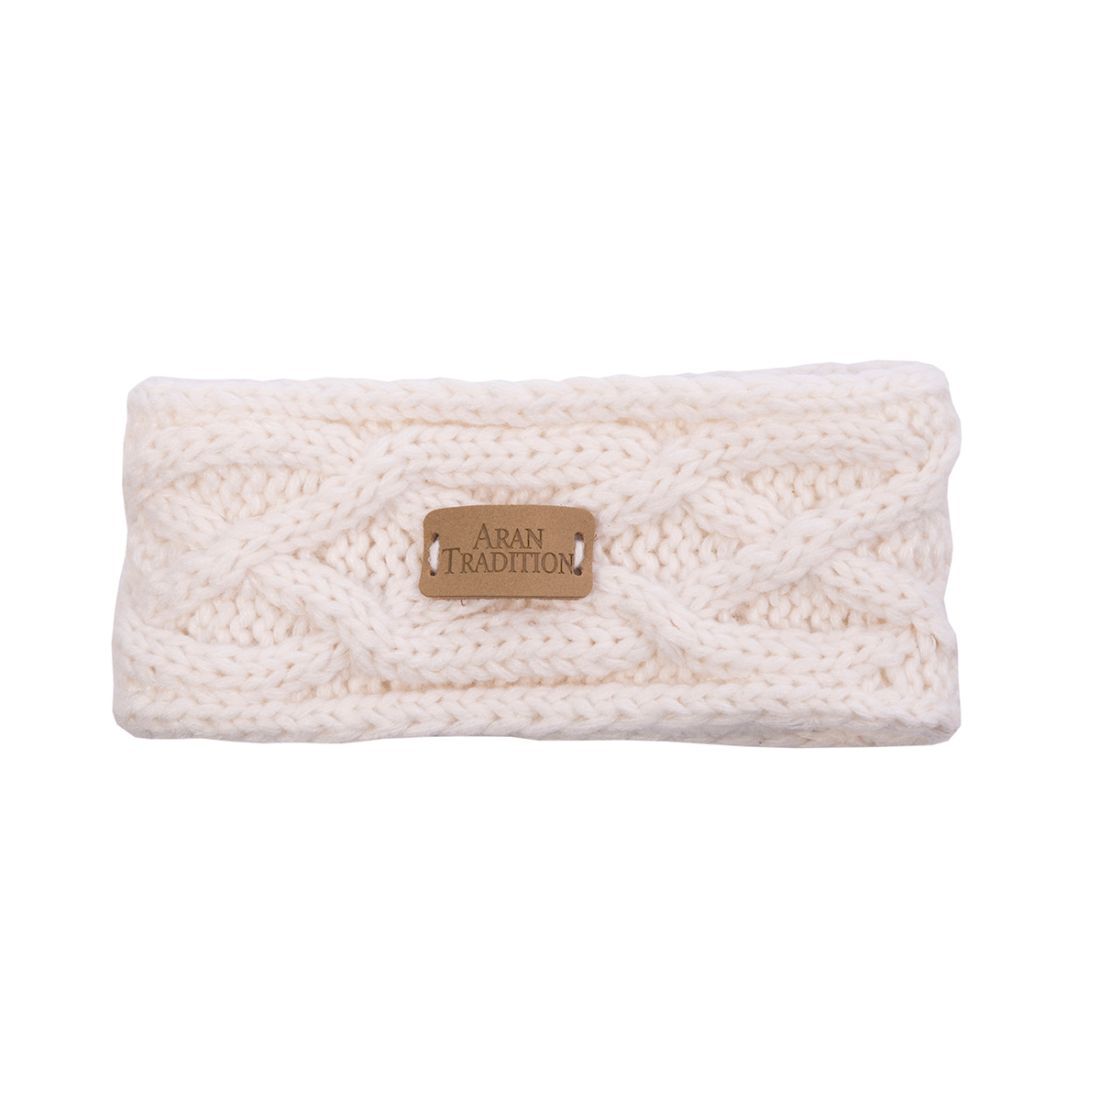 Aran Traditions Cream White Cable Knit Tote Shopping Bag 